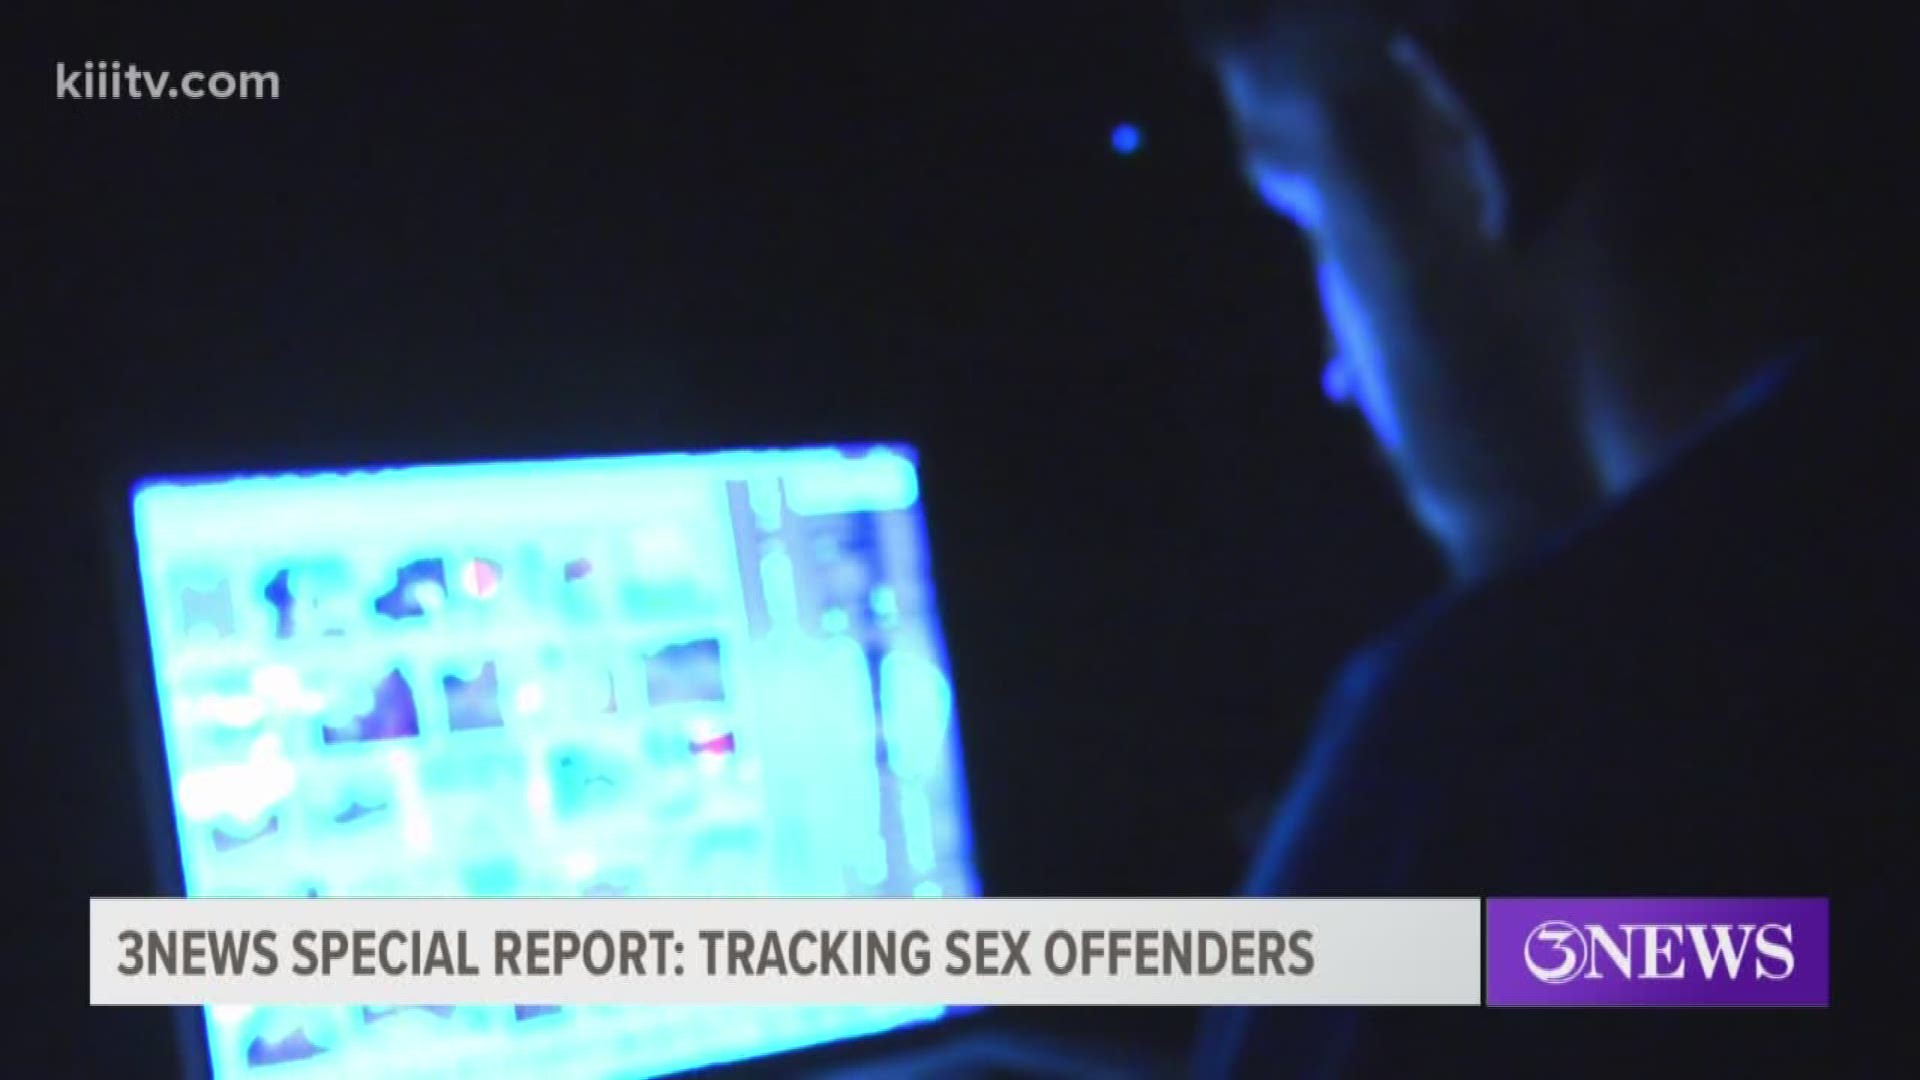 Every local jurisdiction in Texas maintains sex offender registry information to protect the public and track known offenders.